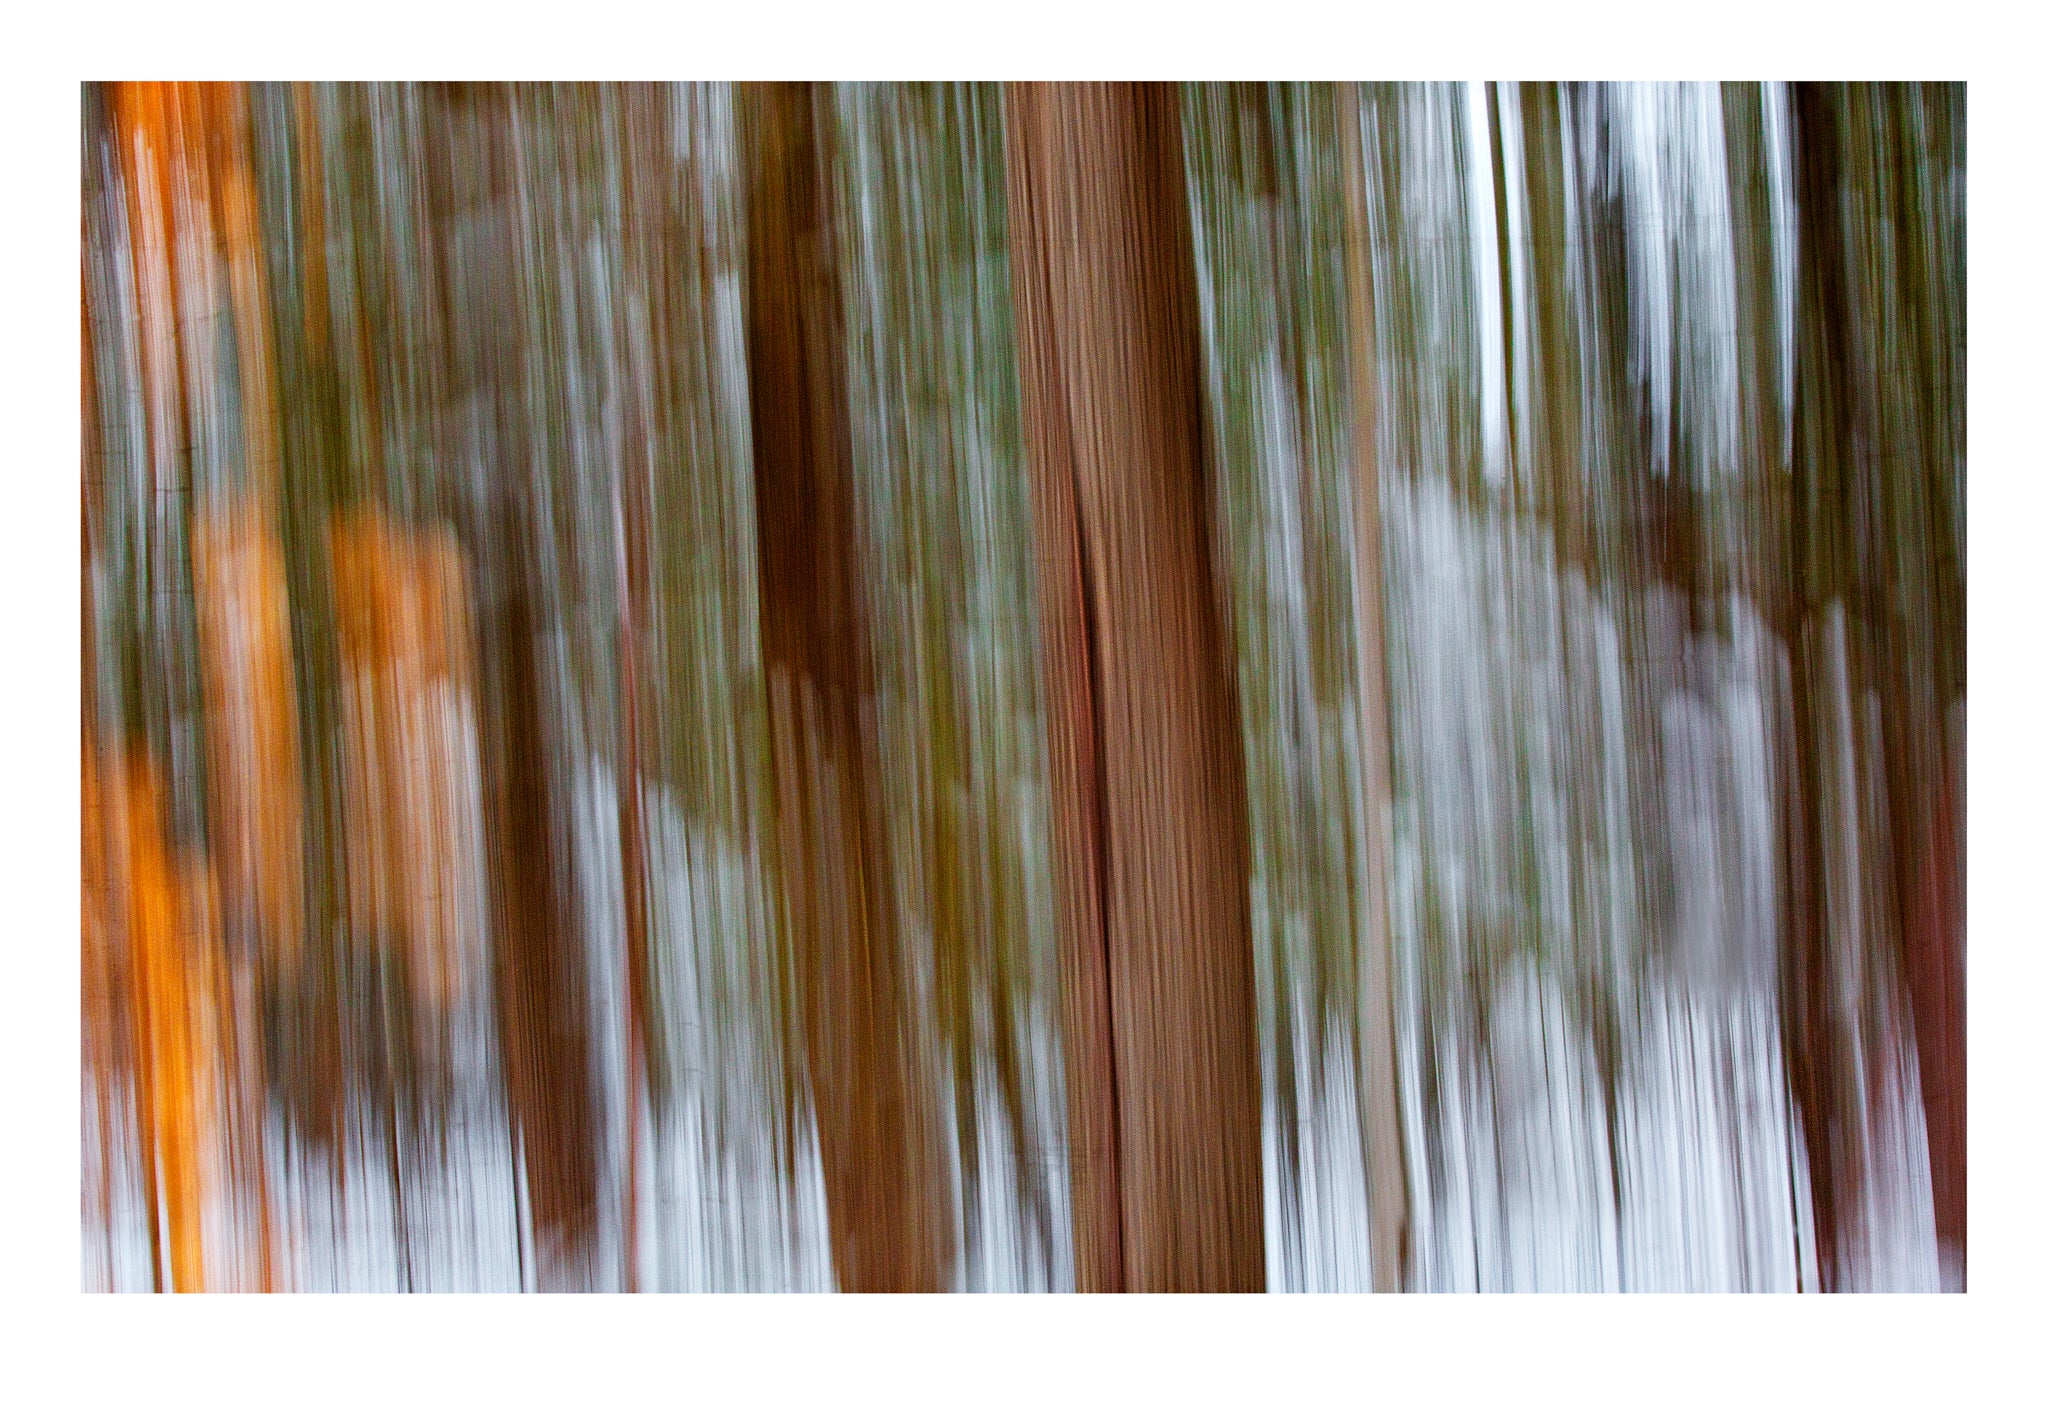 'Into the Woods' - Intentional Camera Movement